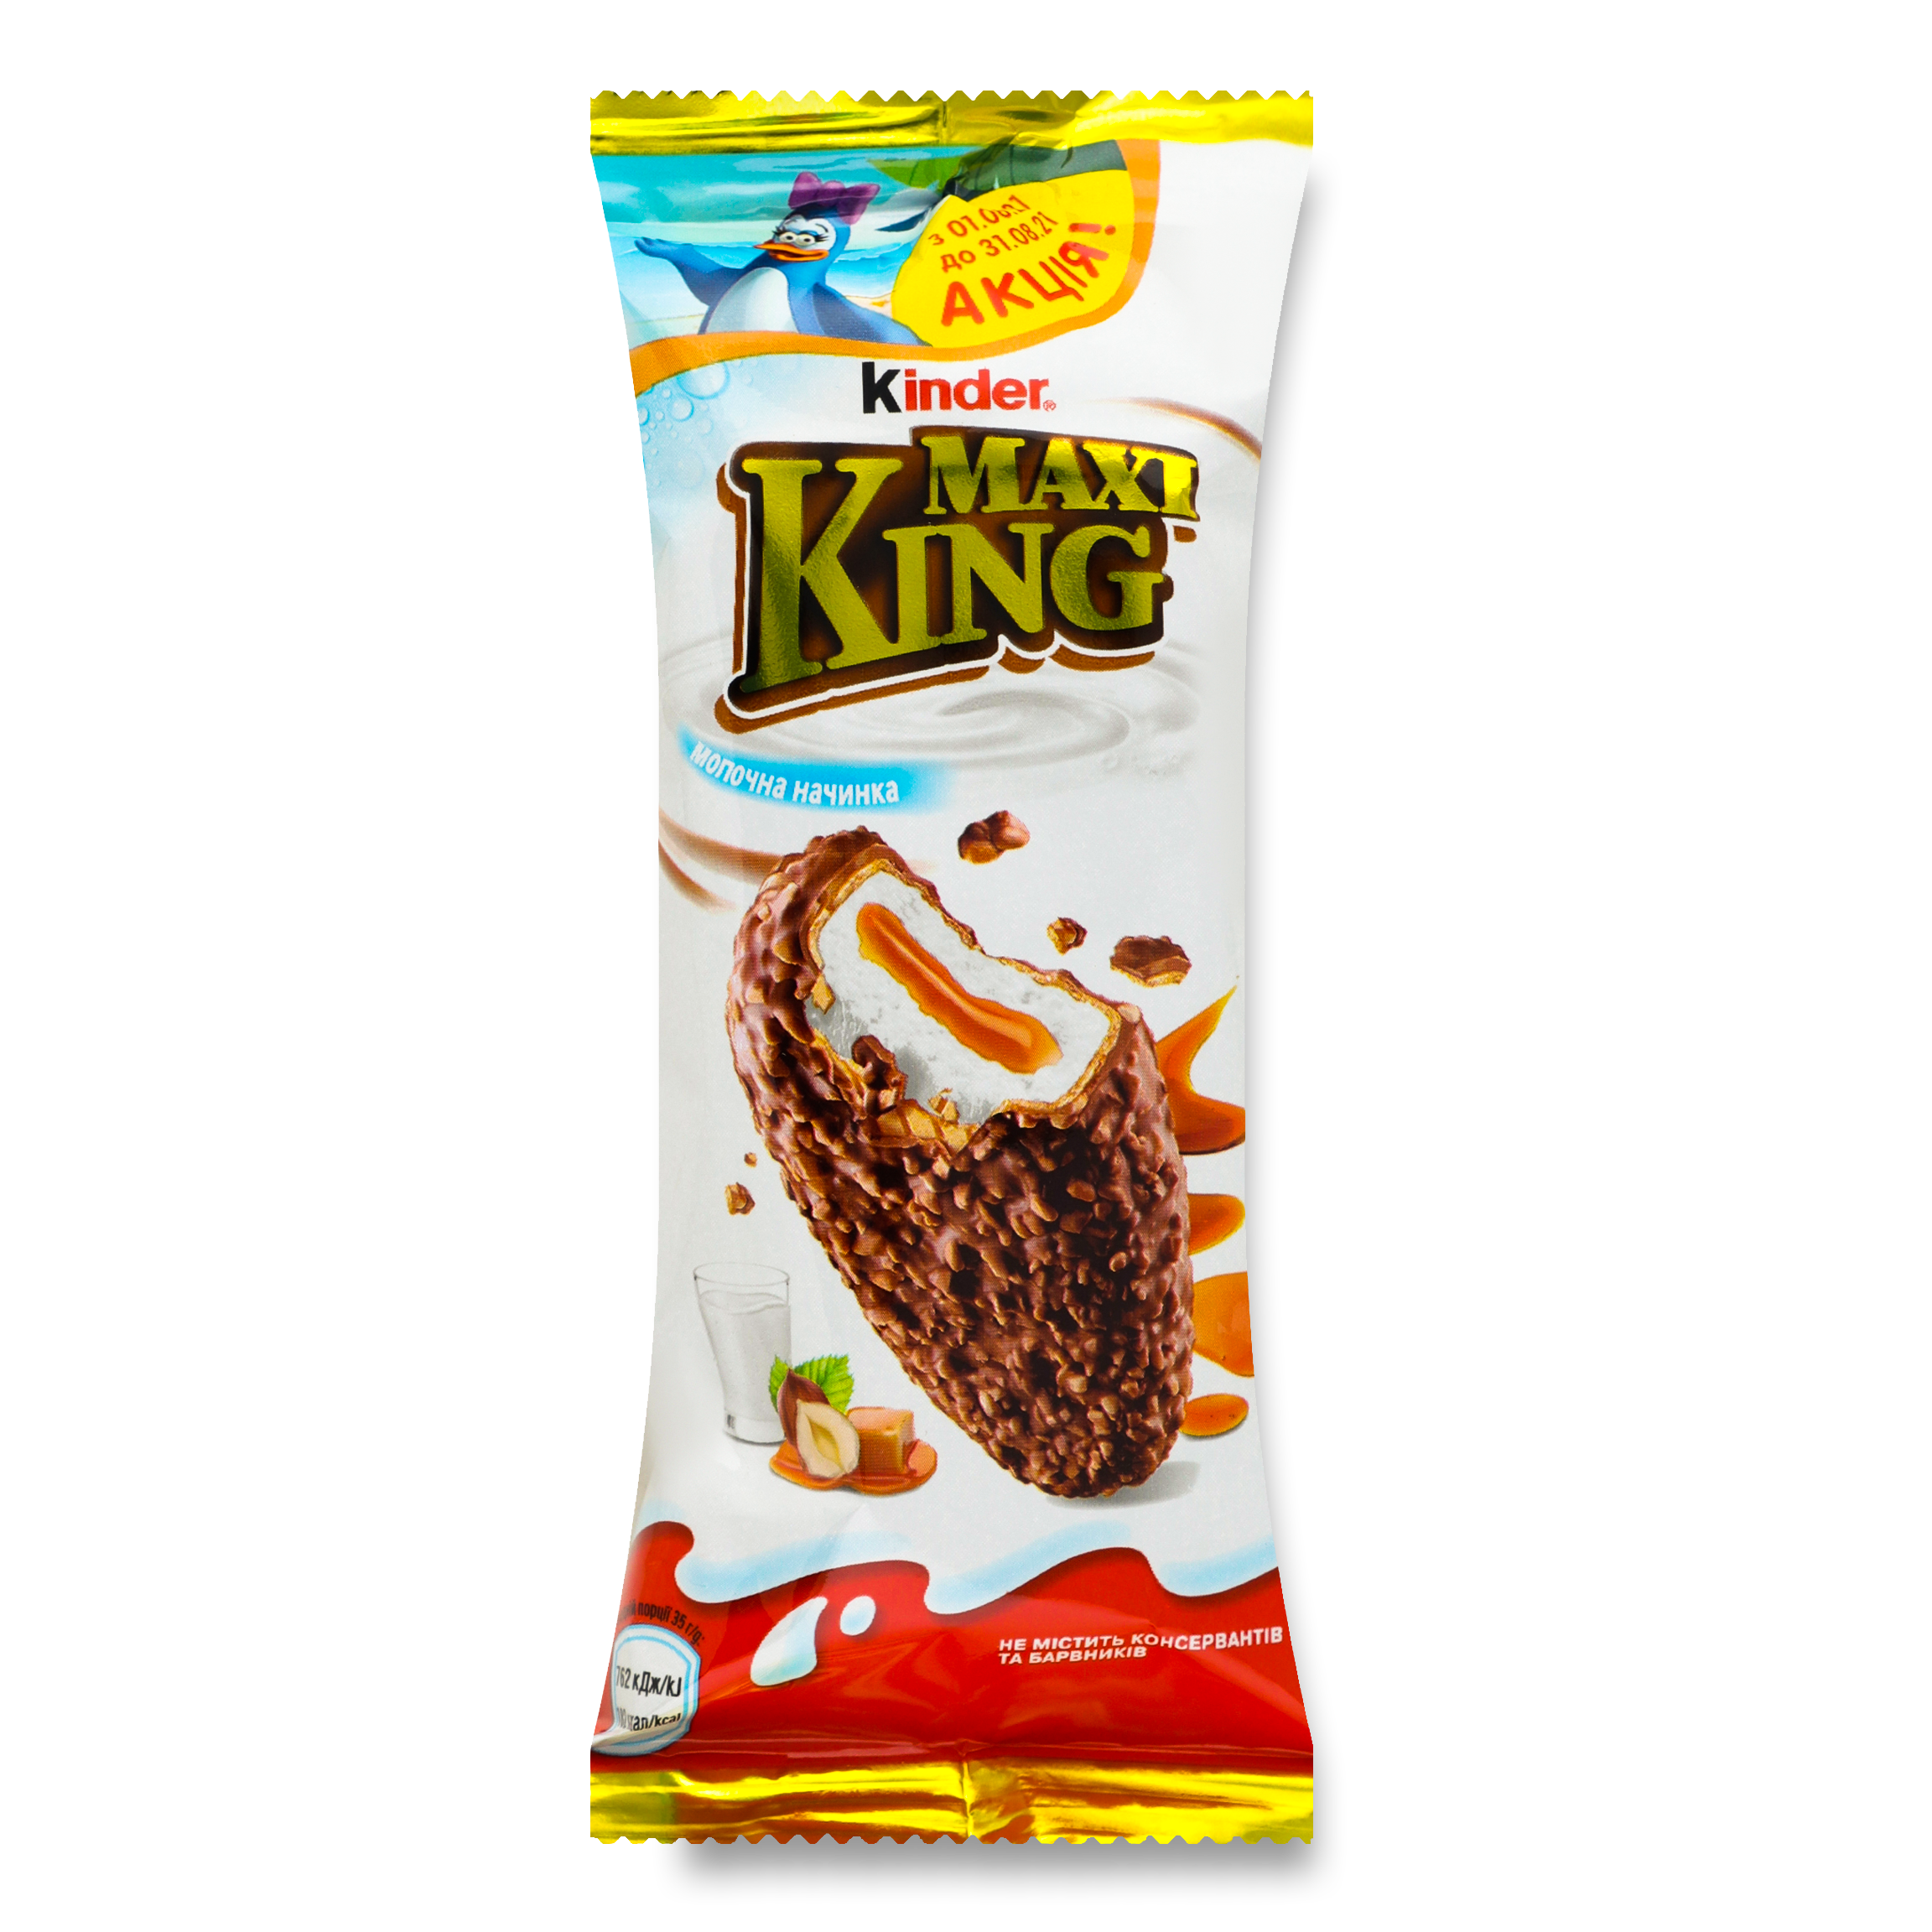 Kinder Maxi King Caramel Covered with Milk Chocolate and Nuts Waffles 35g